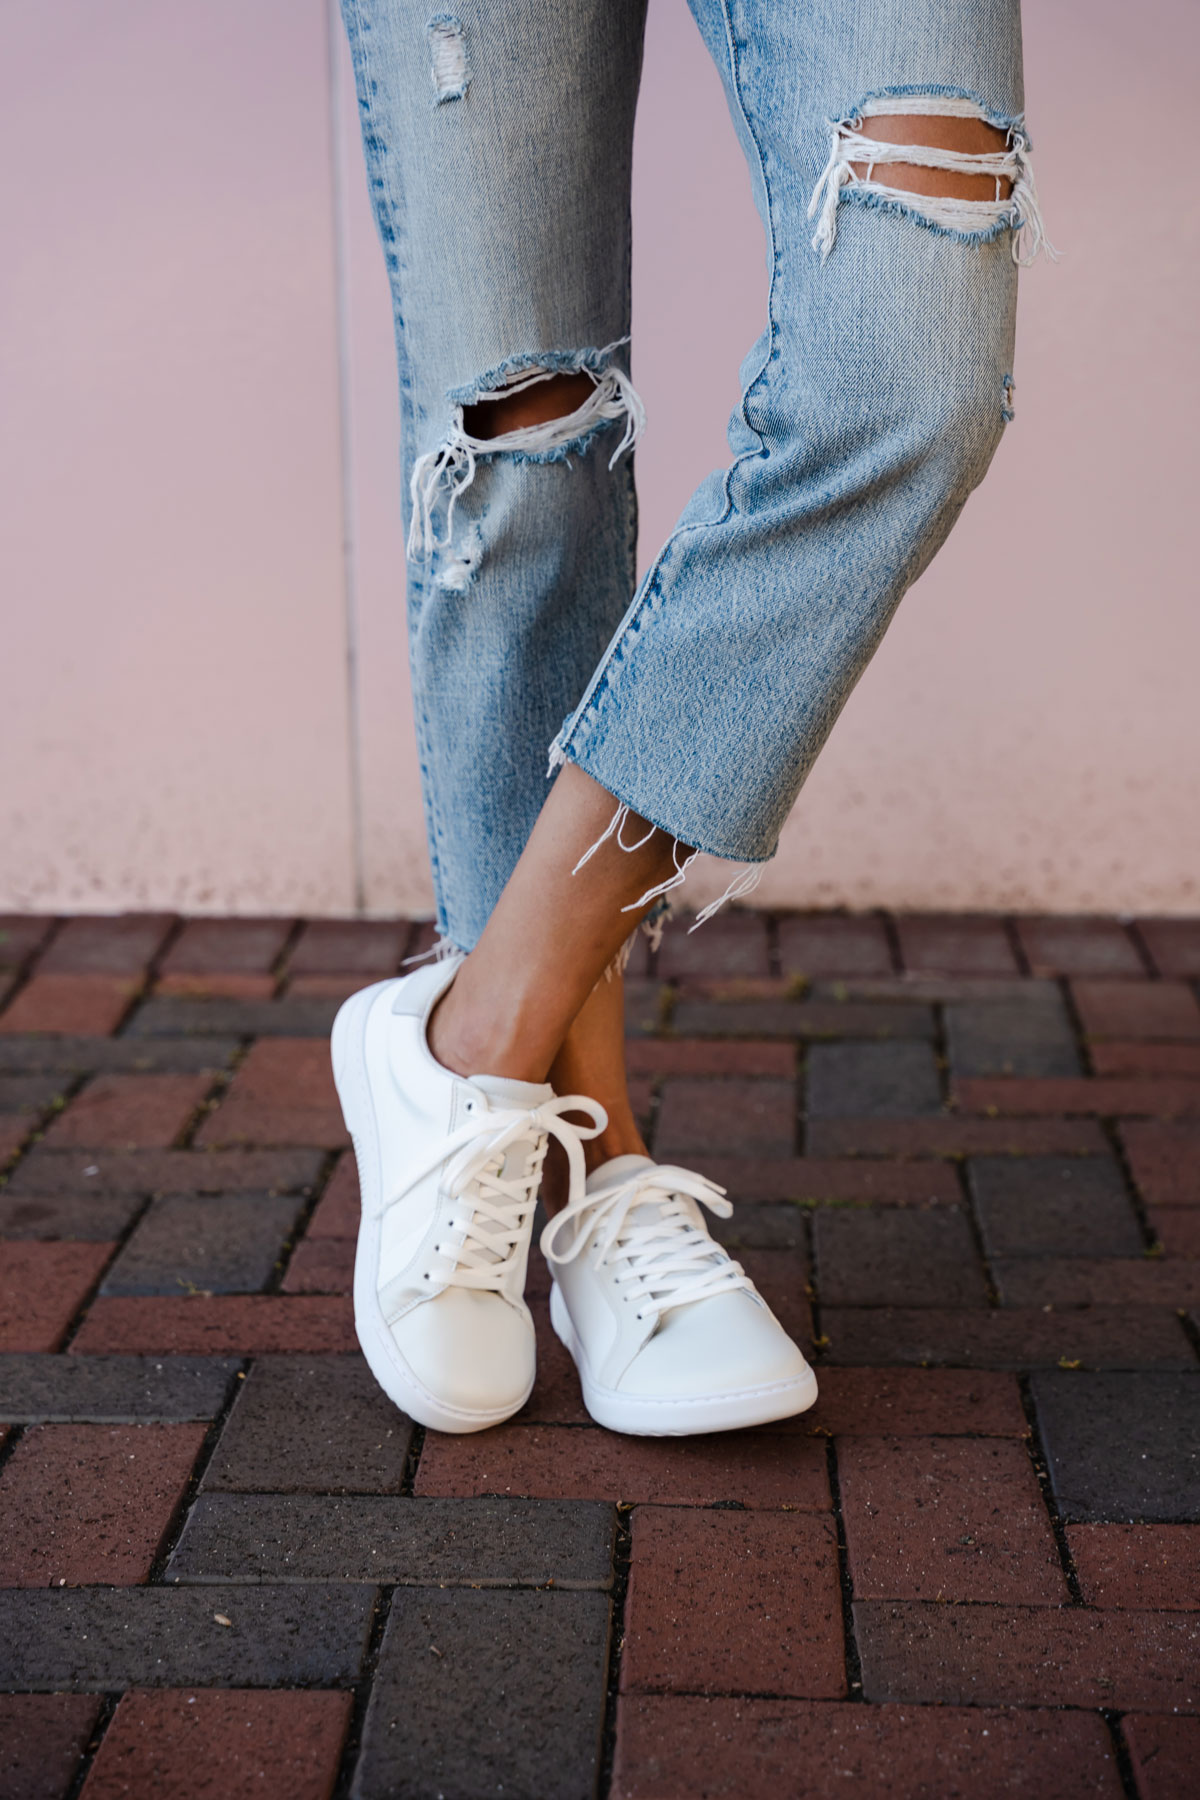 11 Barefoot Shoes are Stylish and